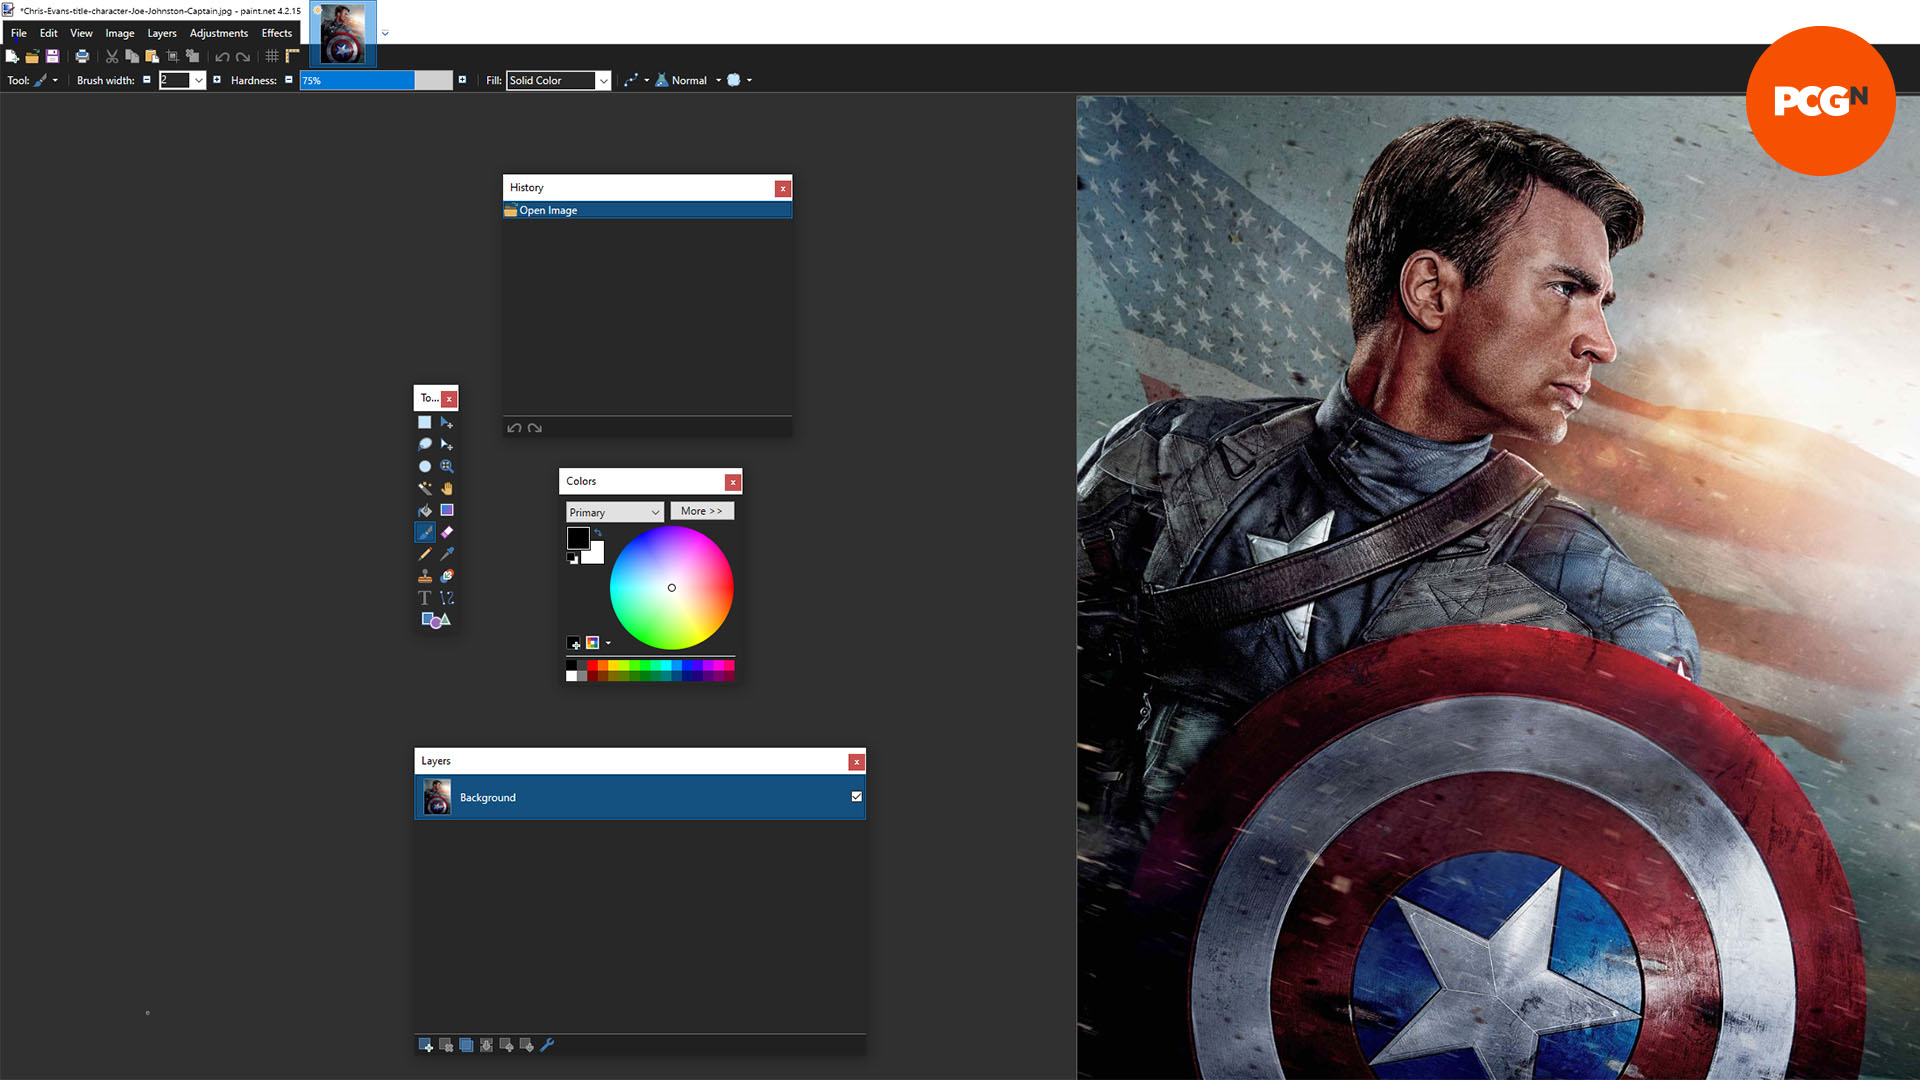 How to engrave your PC case: Captain America image in Paint.Net